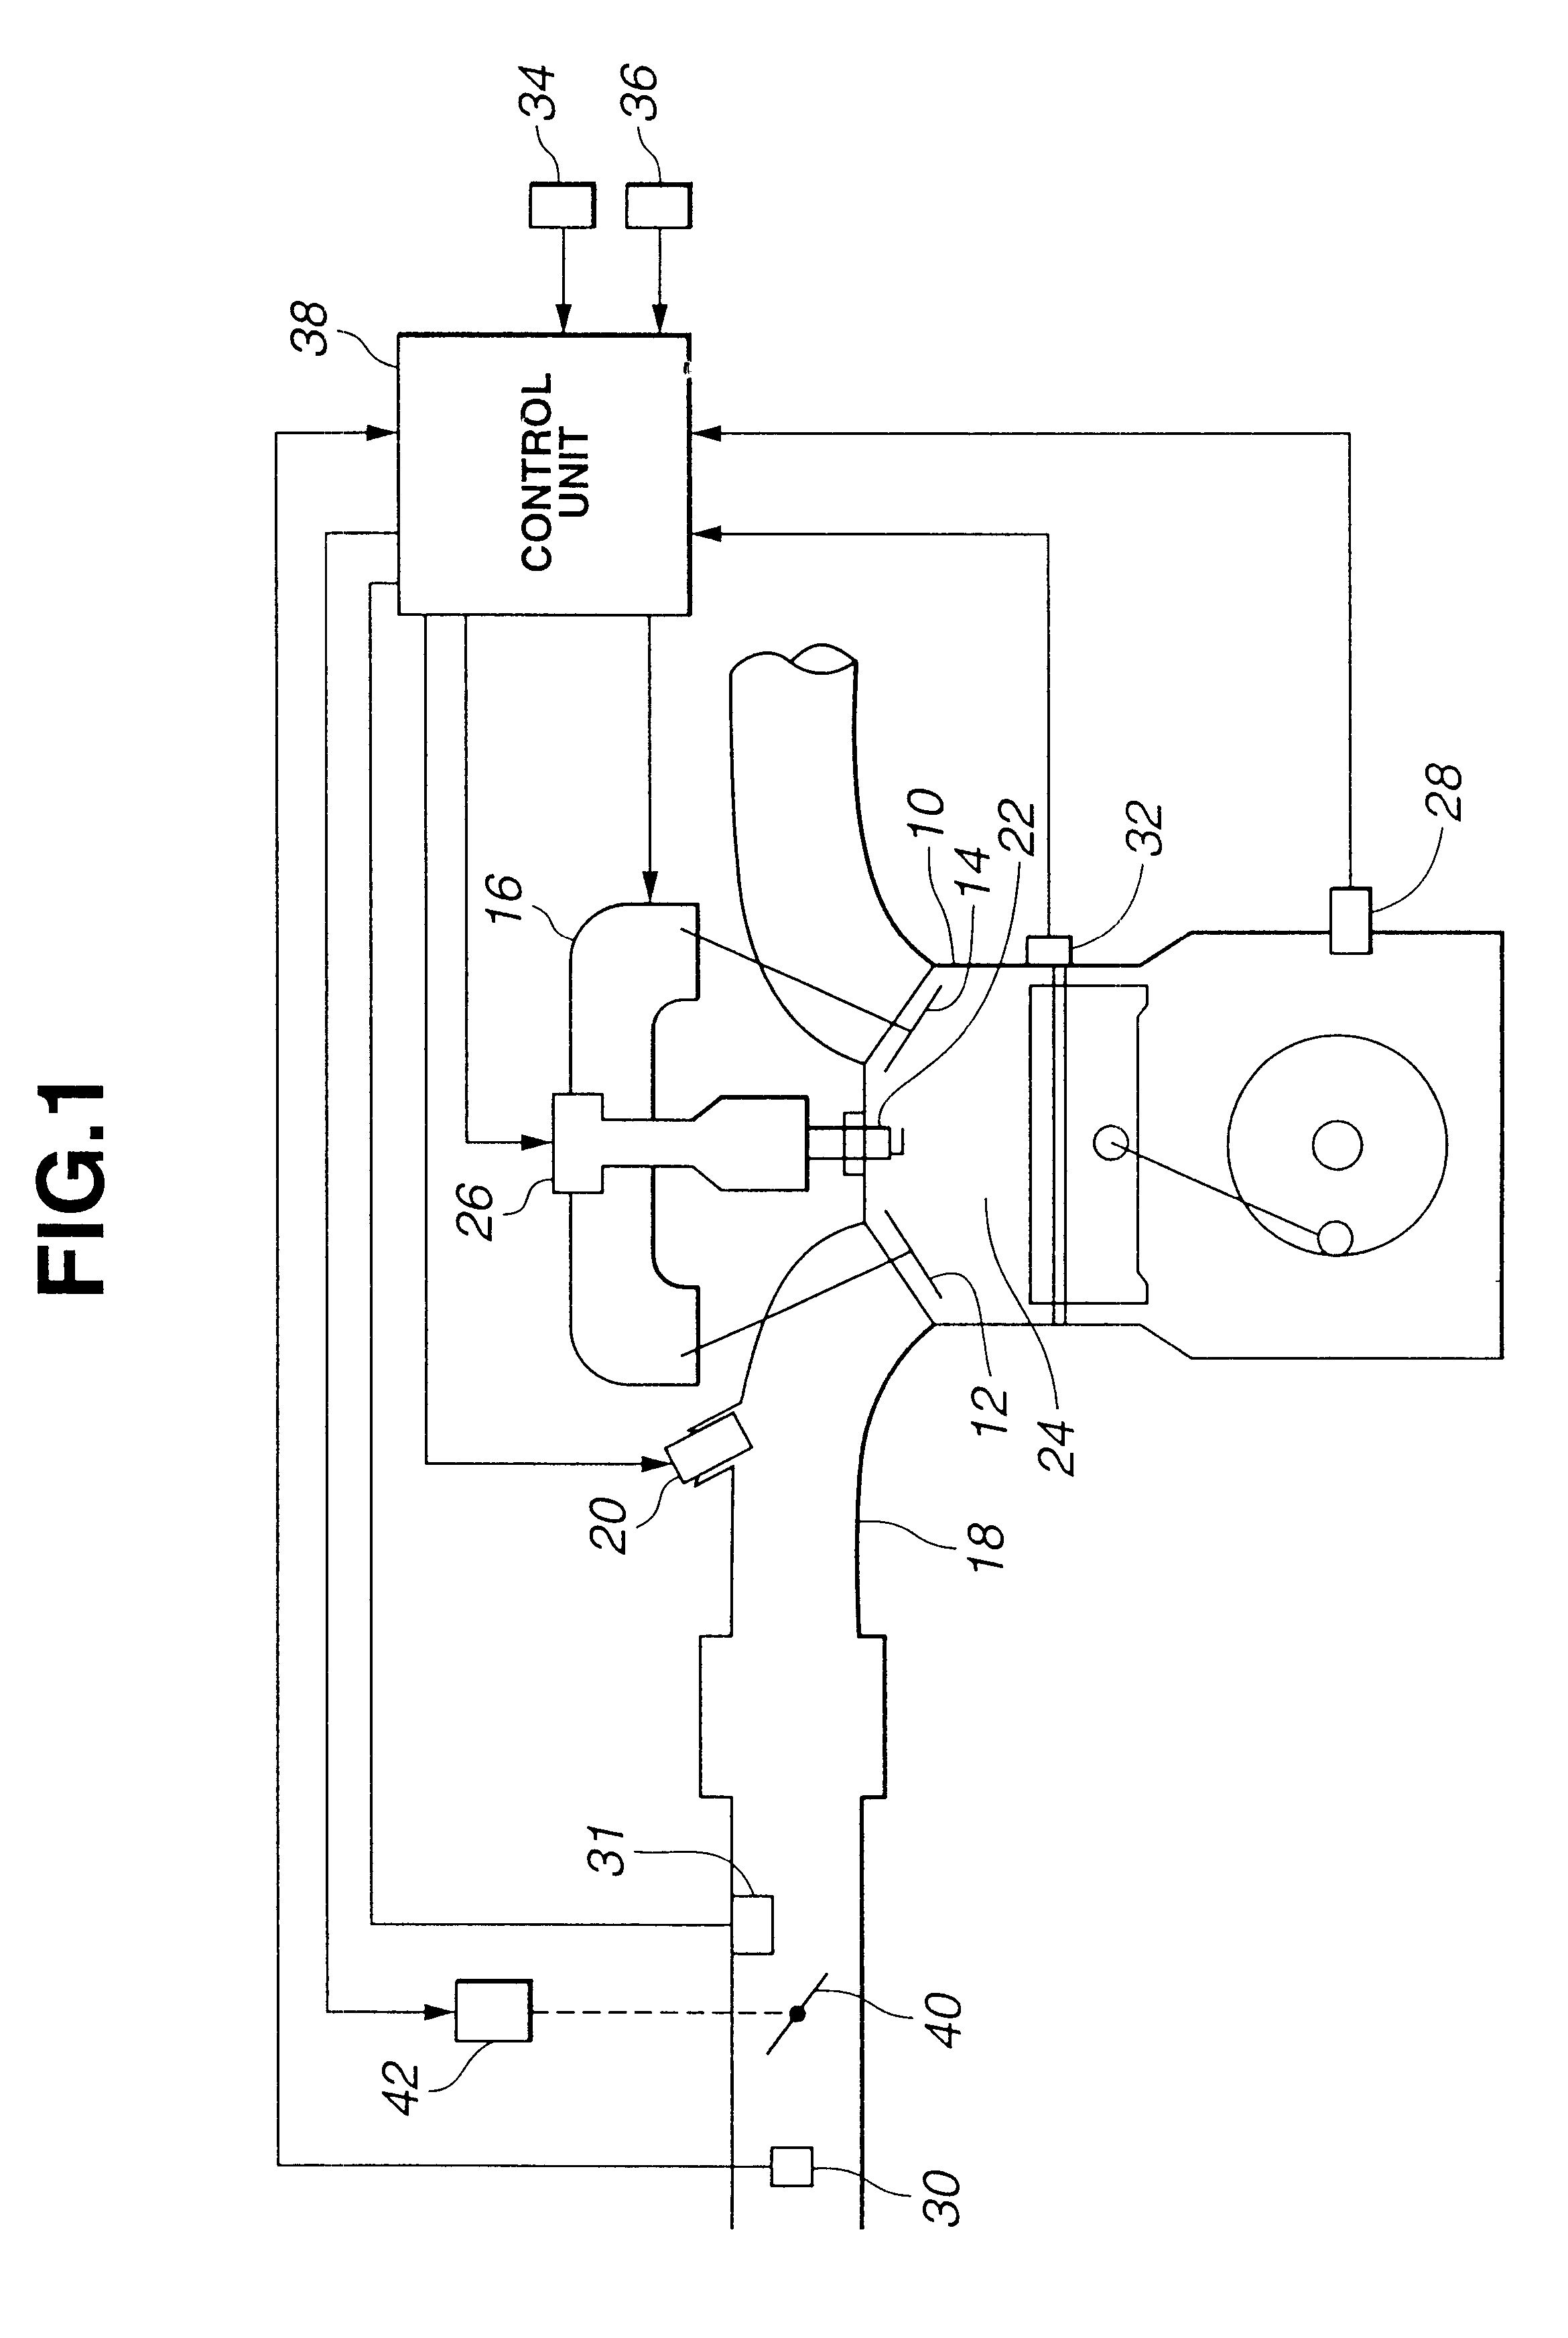 Intake air control system of engine